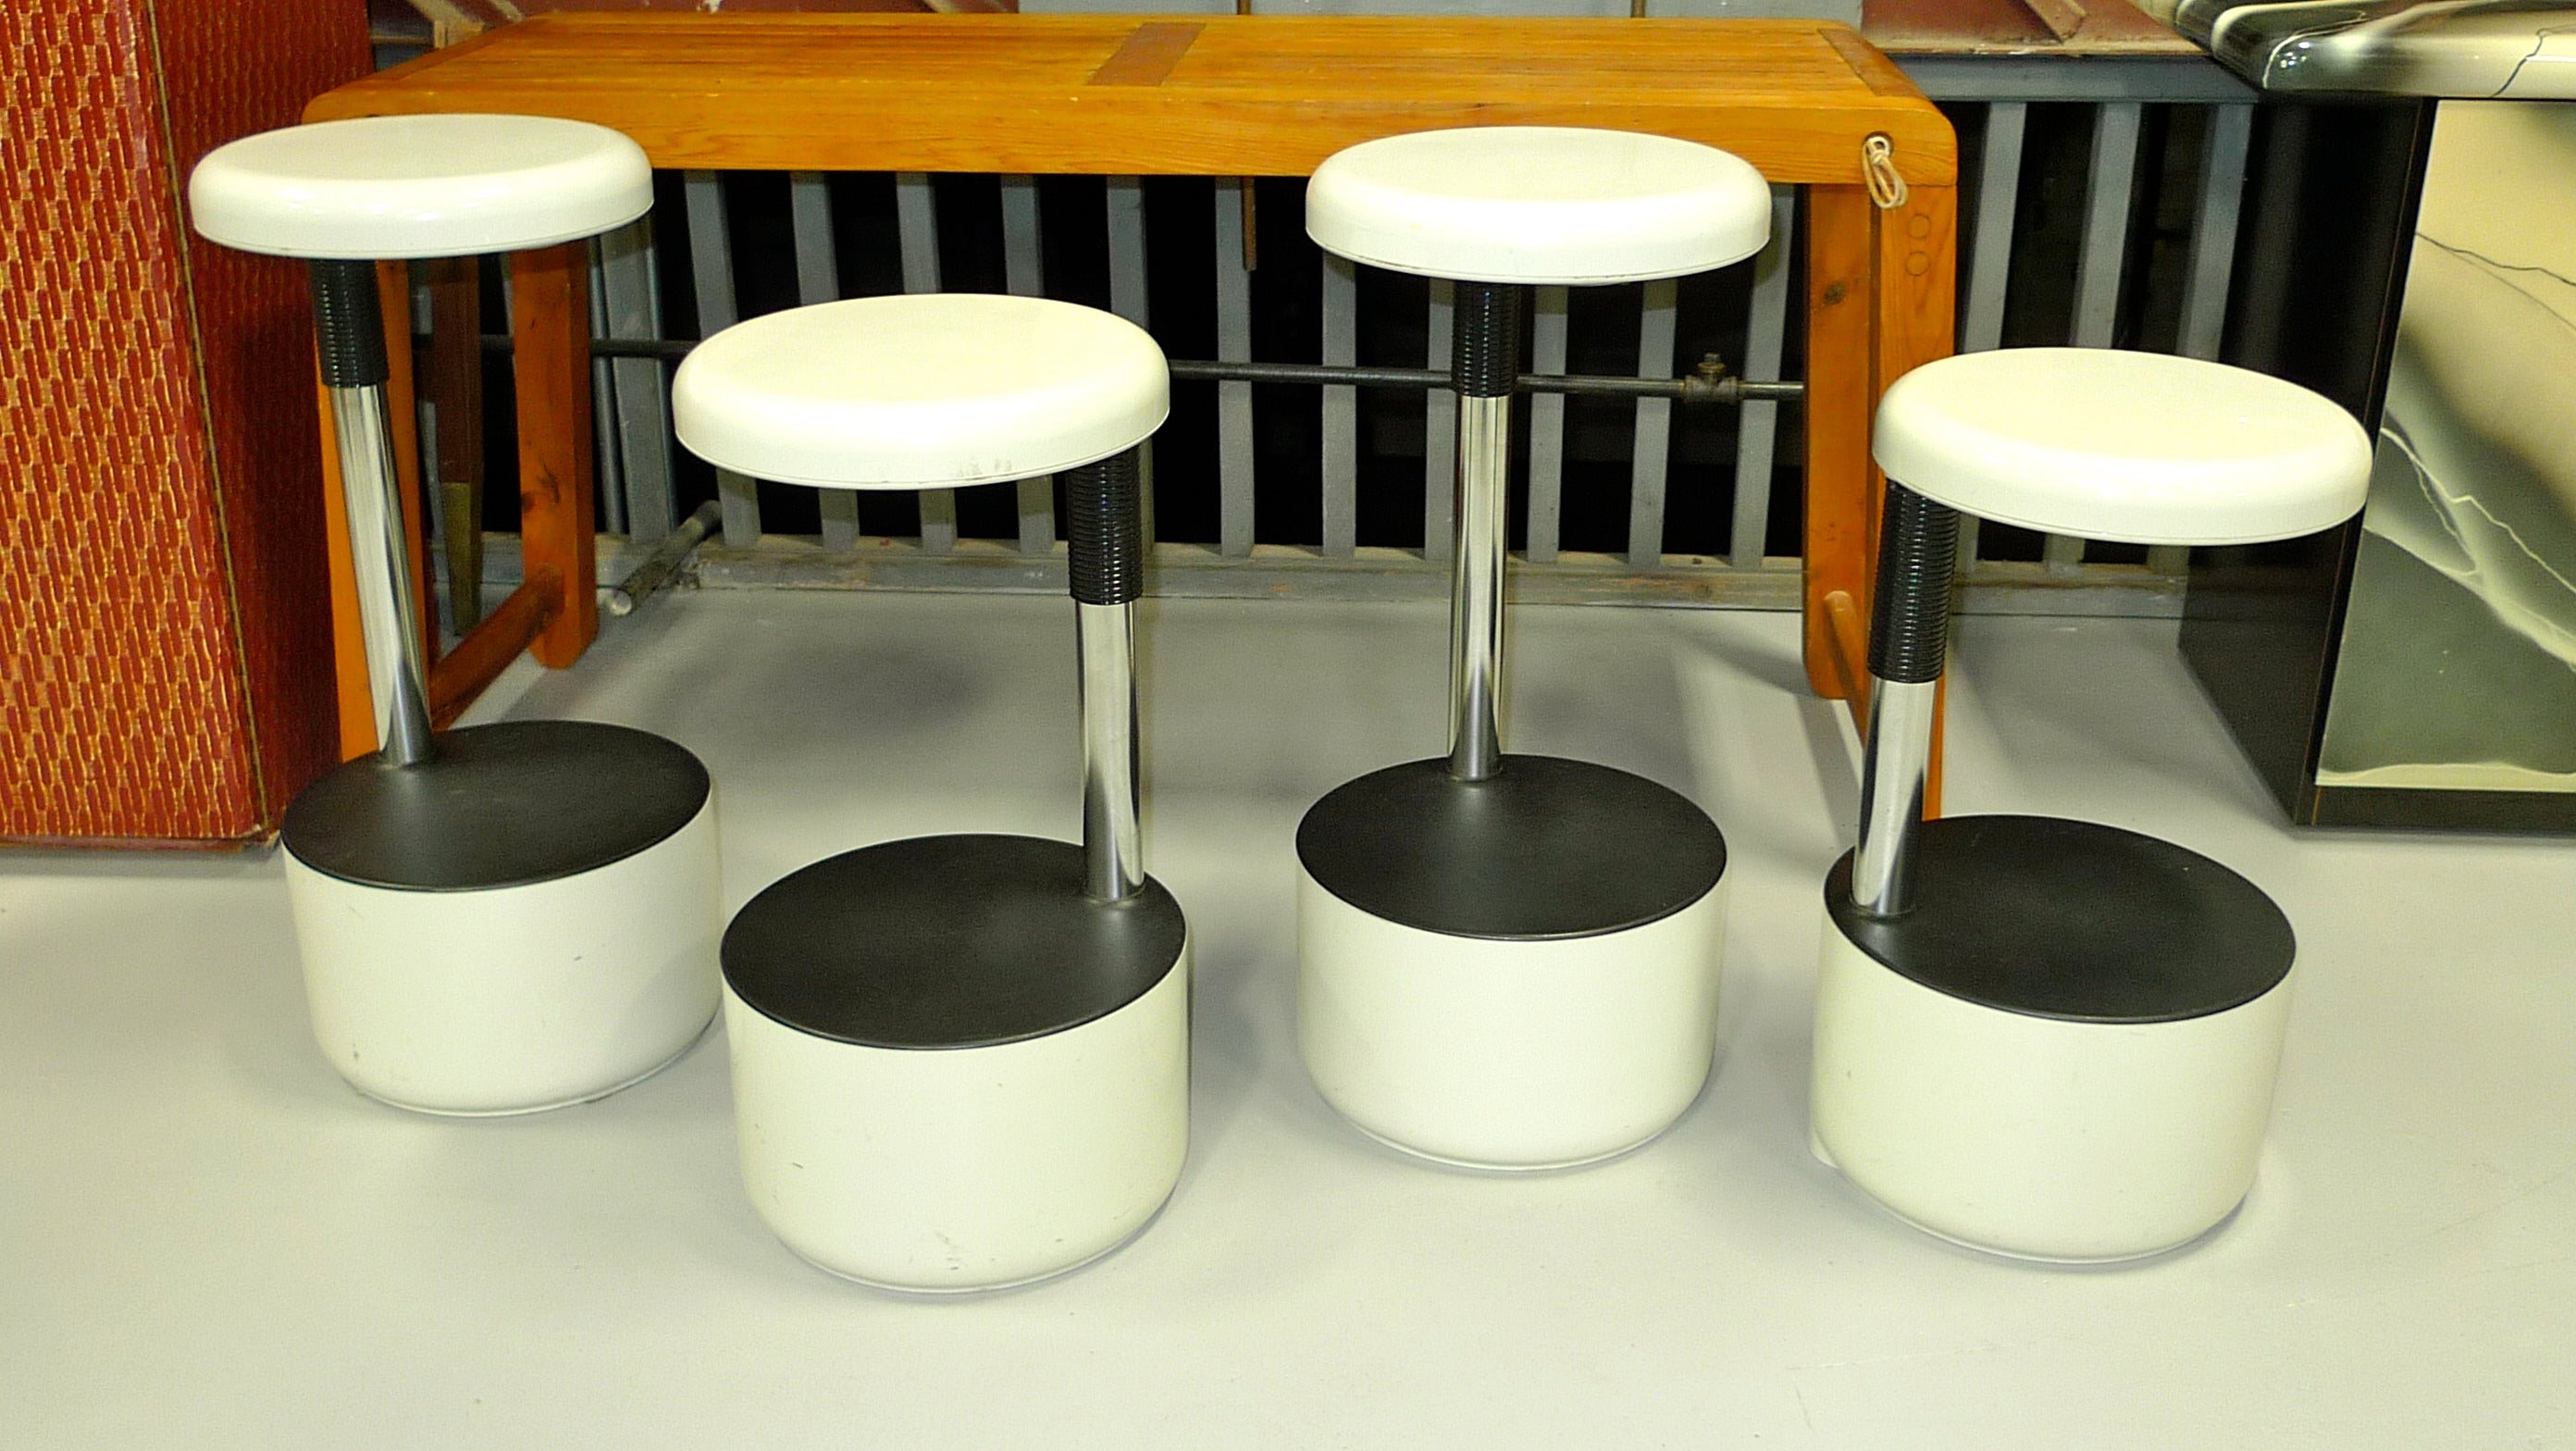 Set of 4 "Golf" Bar Stools by Roberto Lucci and Paolo Orlandini for VELCA